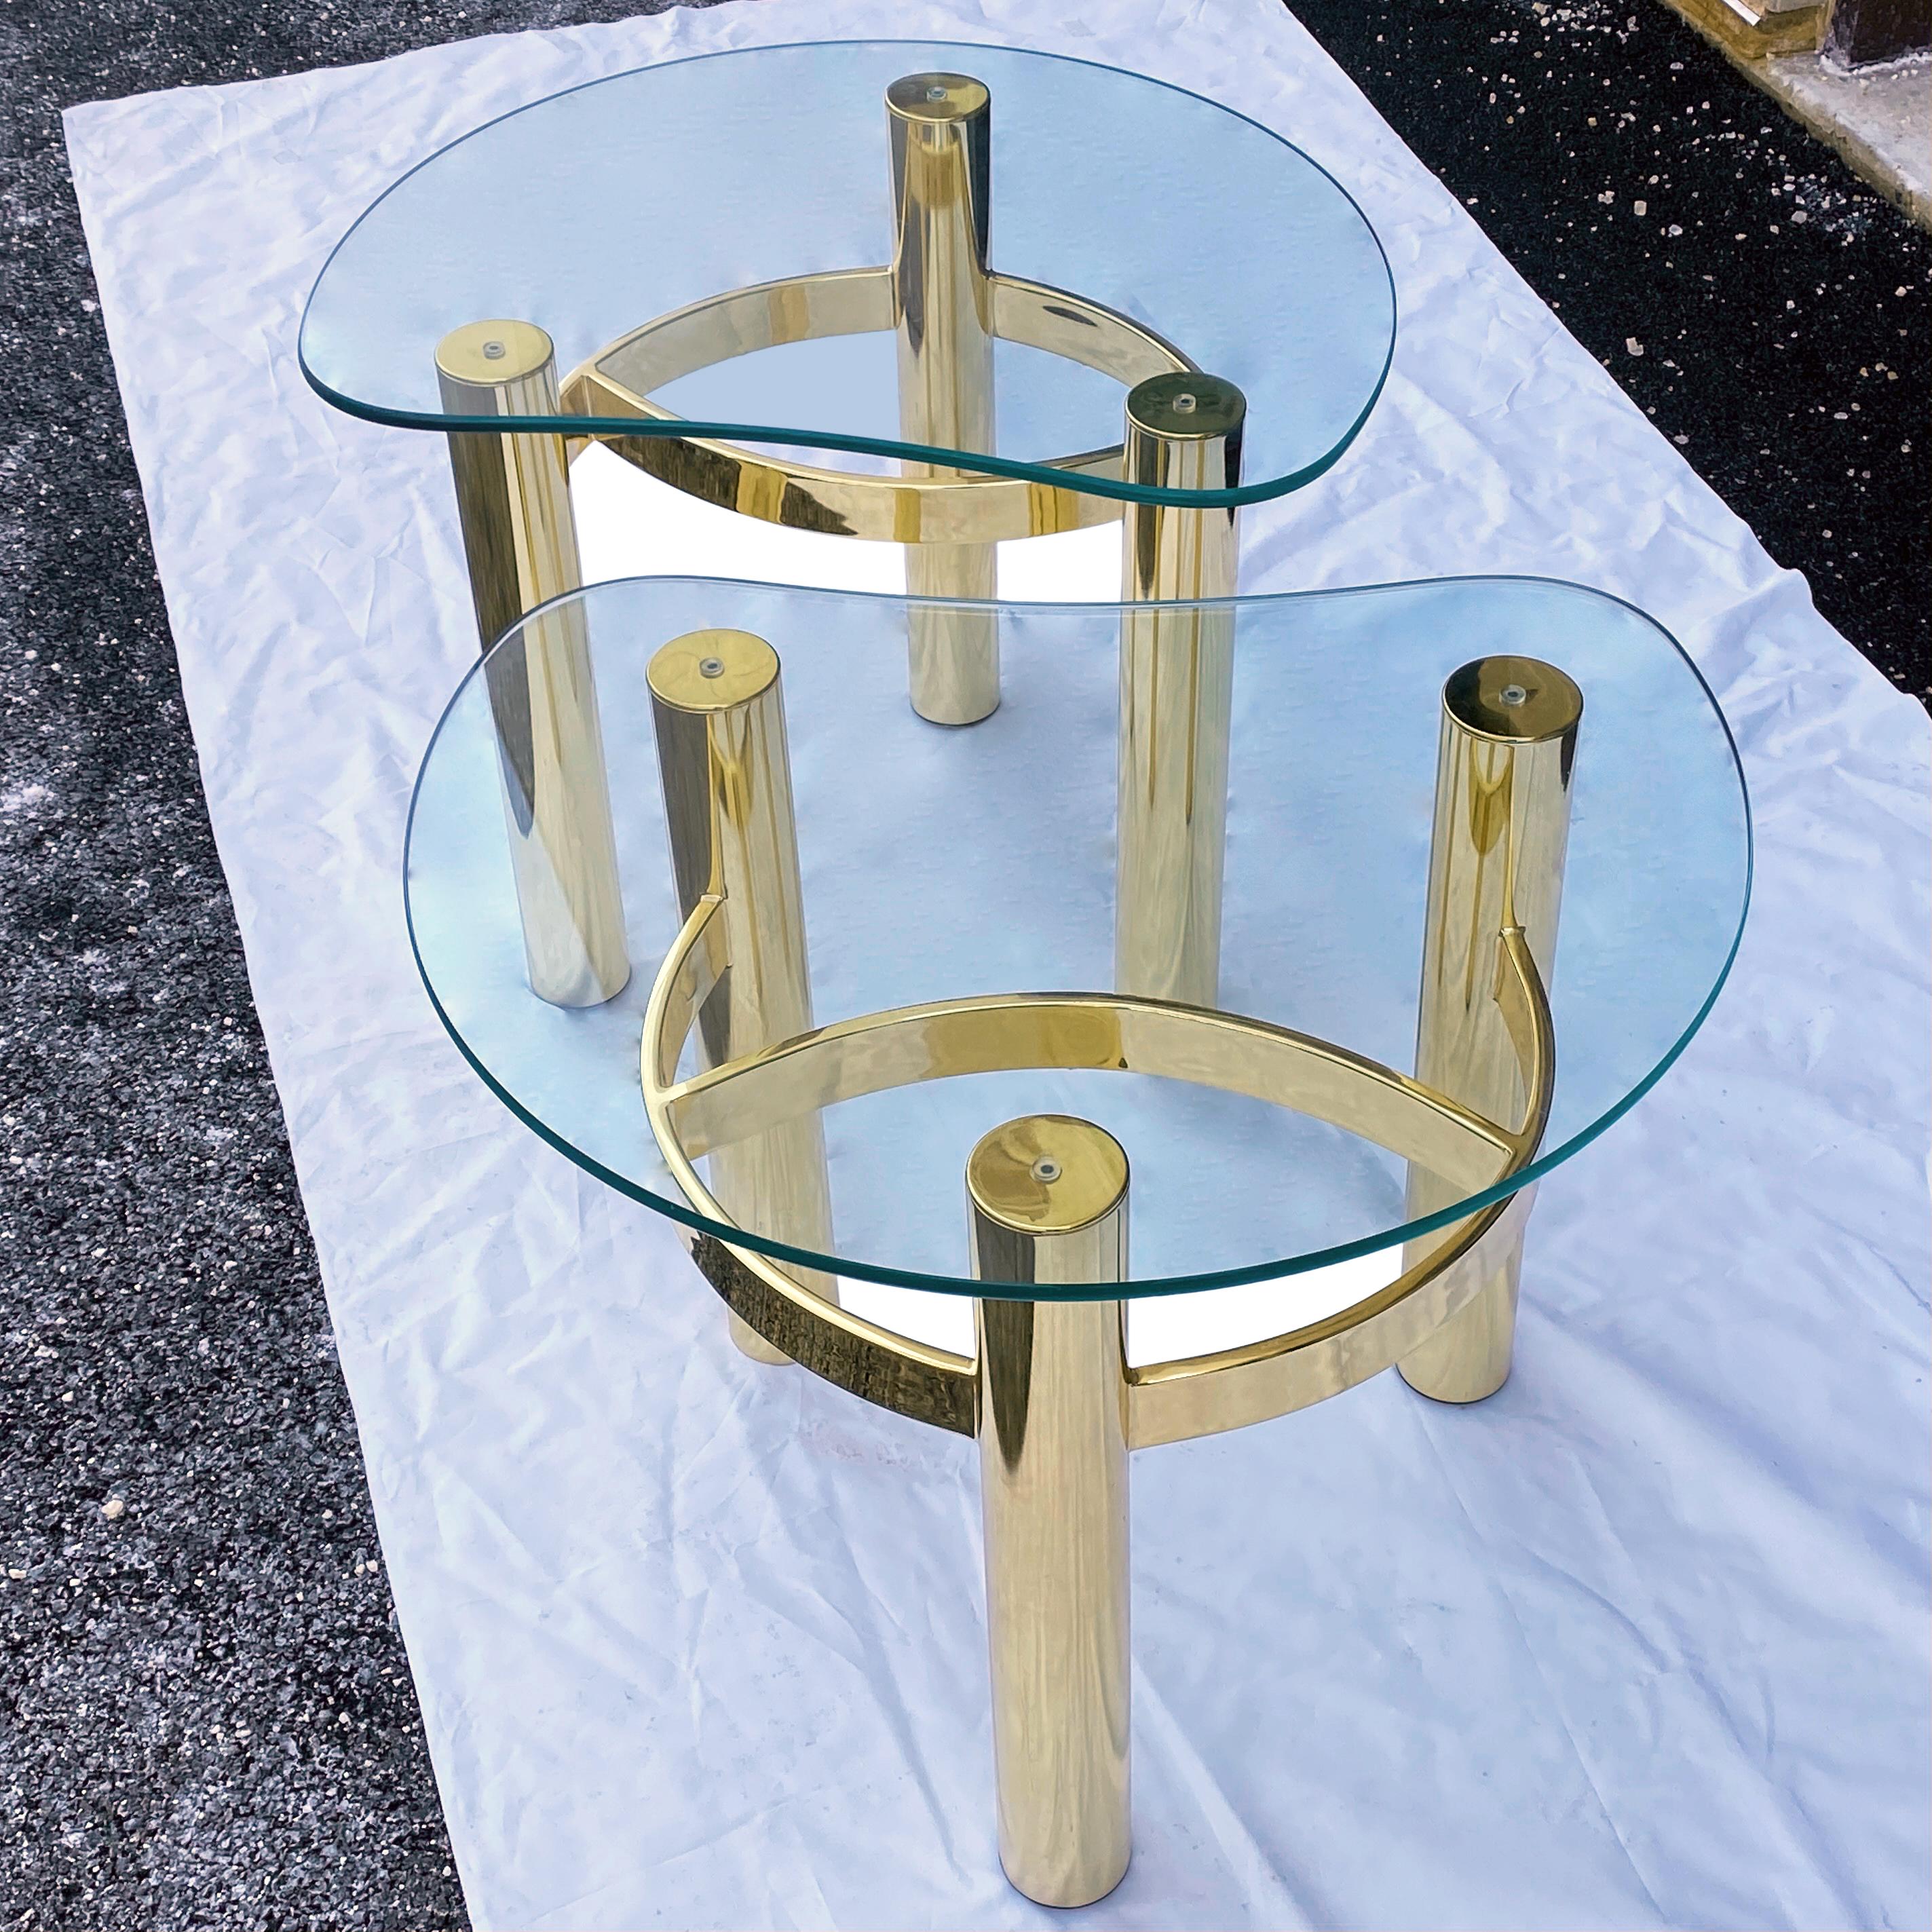 Vintage kidney shaped glass side table set on one piece brass finished sculptural base. Circa late 20th century unmarked. 1/2” thick glass tops